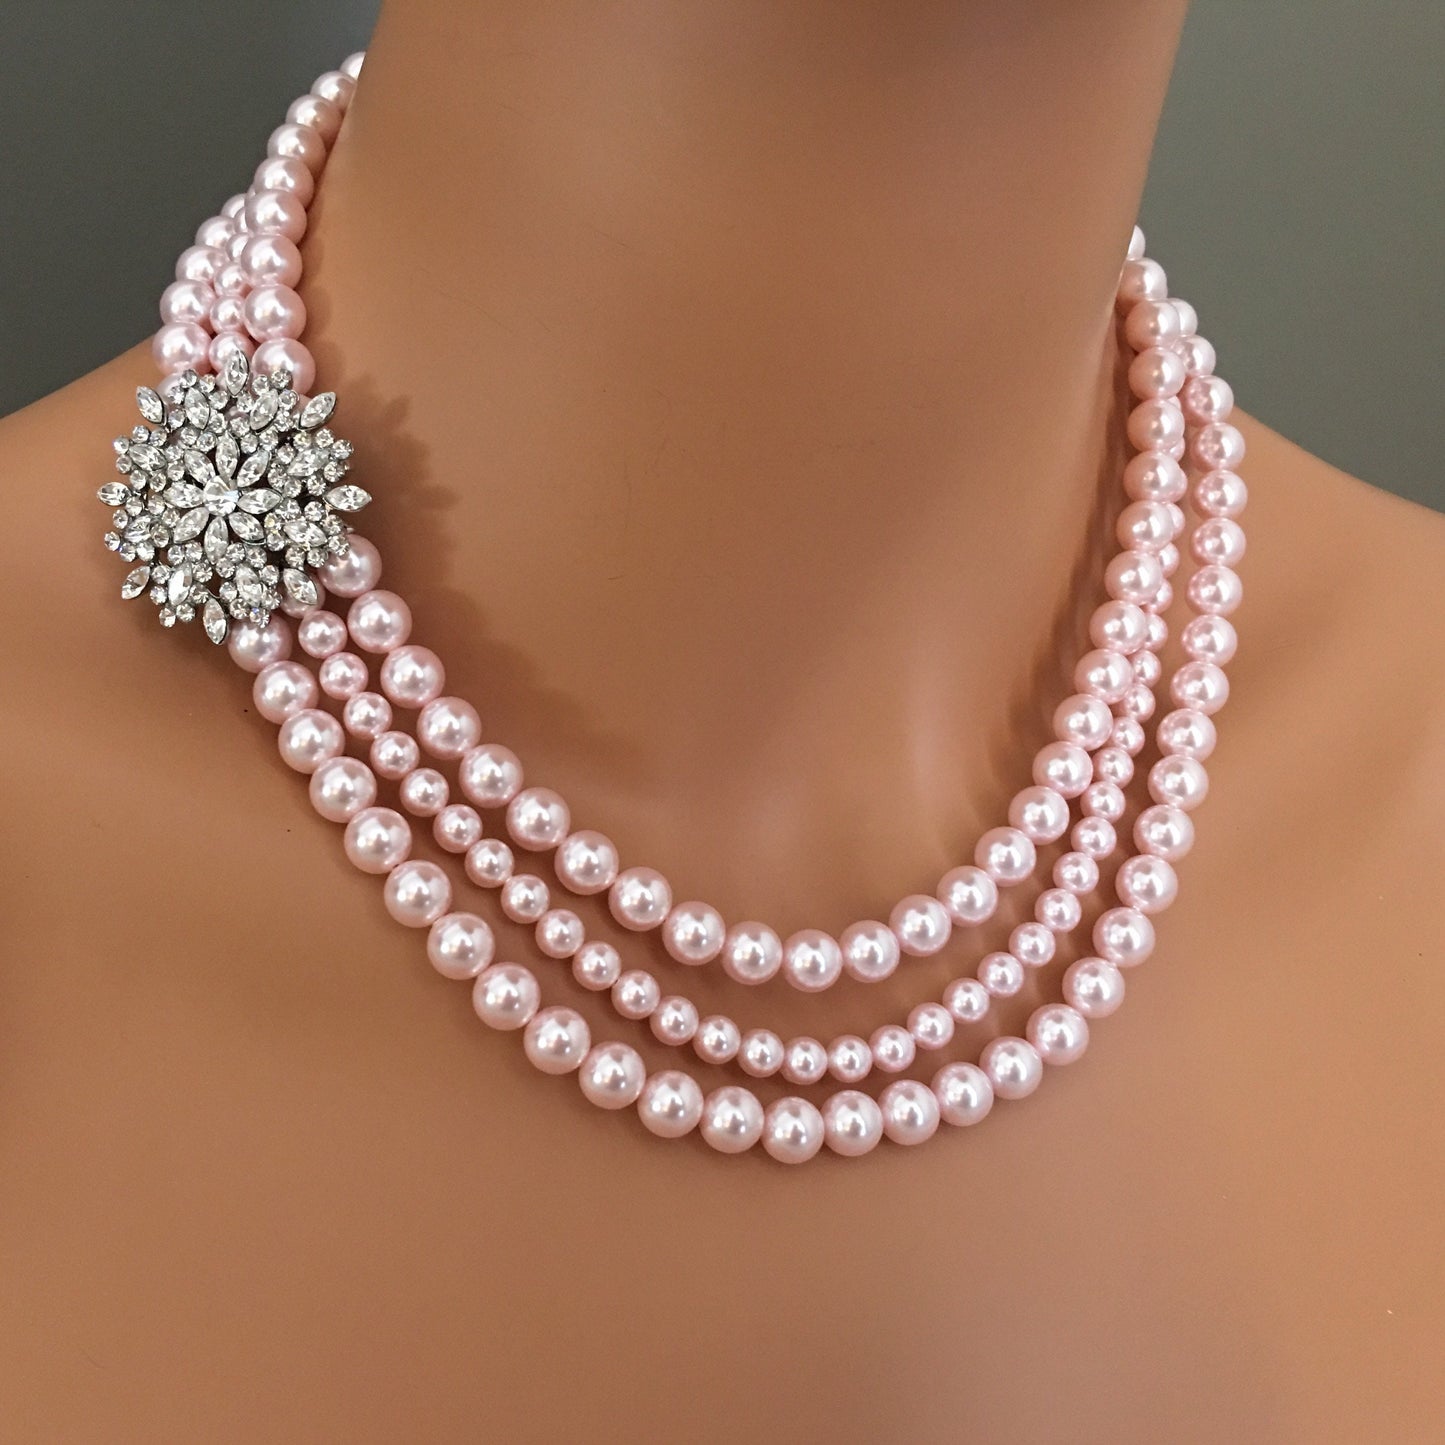 Blush Pearl Necklace Set with Earrings in Rosaline Pink Crystal pearls 3 strands and rhinestone brooch wedding bridal jewelry